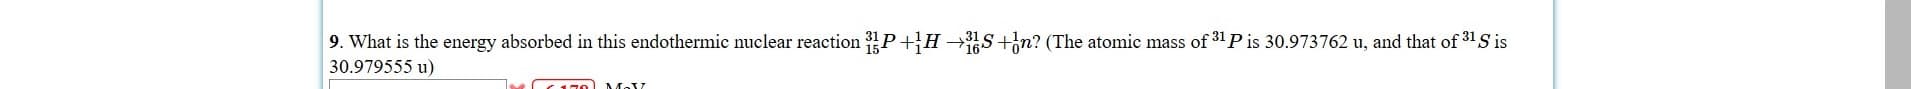 9. What is the energy absorbed in this endothermic nuclear reaction P+H
30.979555 u)
S+in? (The atomic mass of 31Pis 30.973762 u, and that of 31 S is
